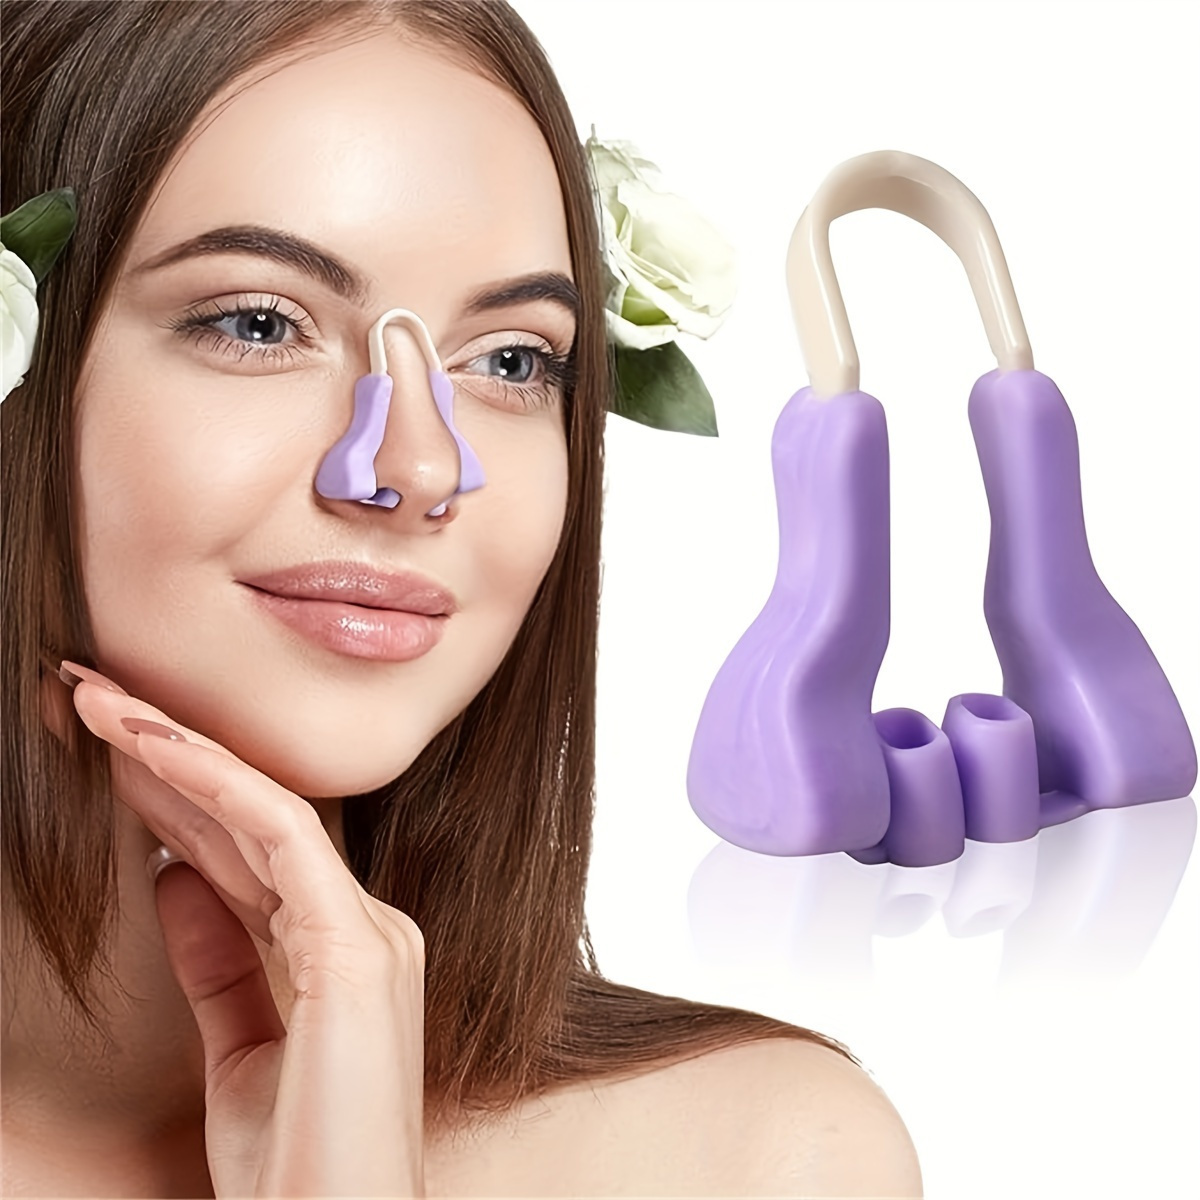 

1pc Silicone Nose Shaper Clip For Instant Reshaping, Wide Nose Soft Silicone Nose Straightener, Corrector, Painless Shrinking Tool, Ideal Nose Lifter Tool